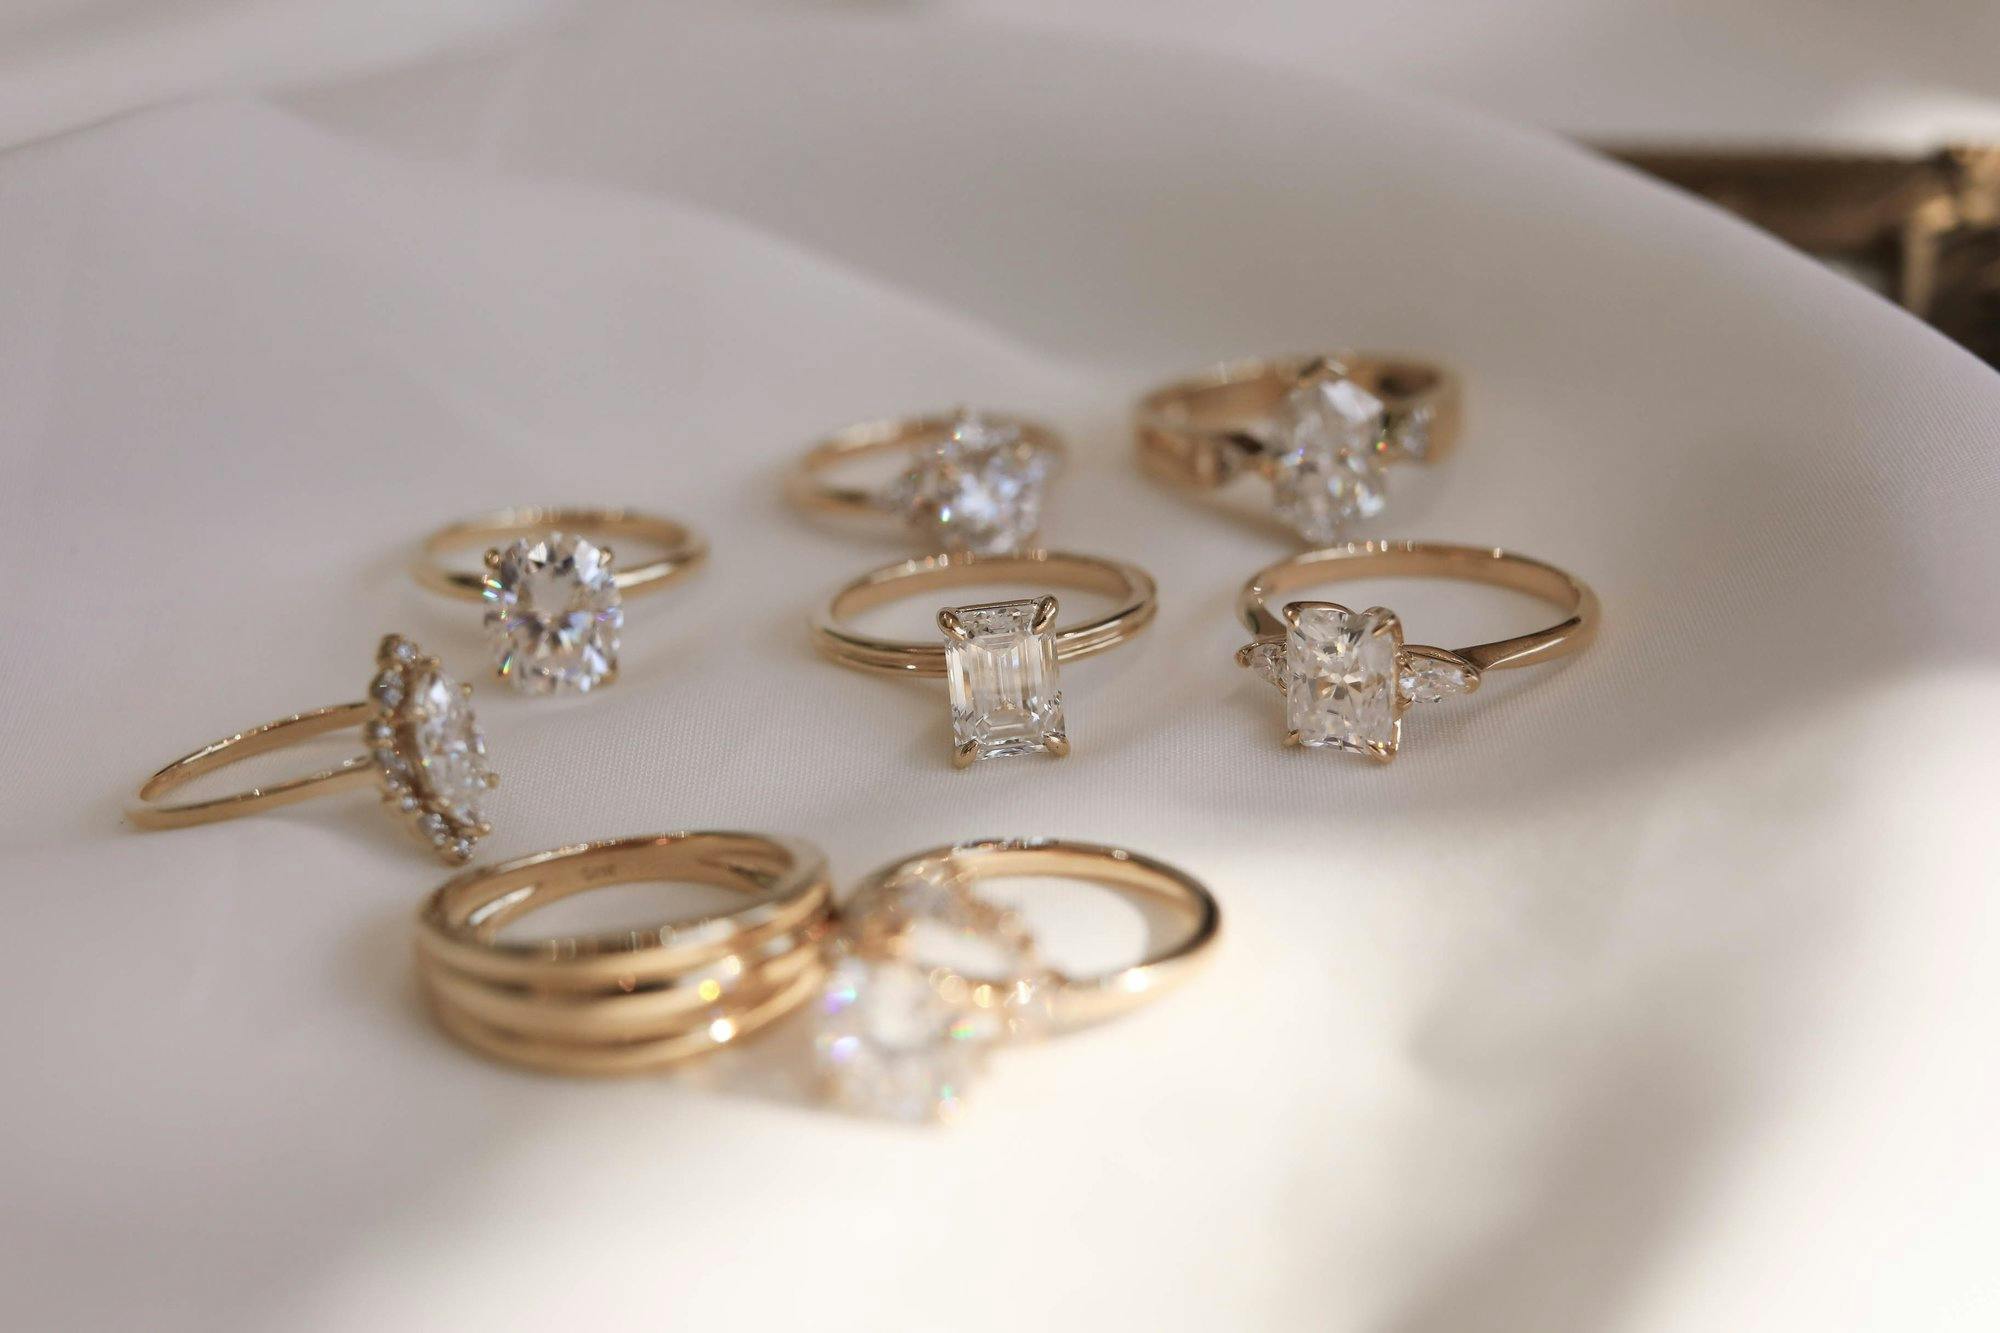 group shot of yellow gold rings